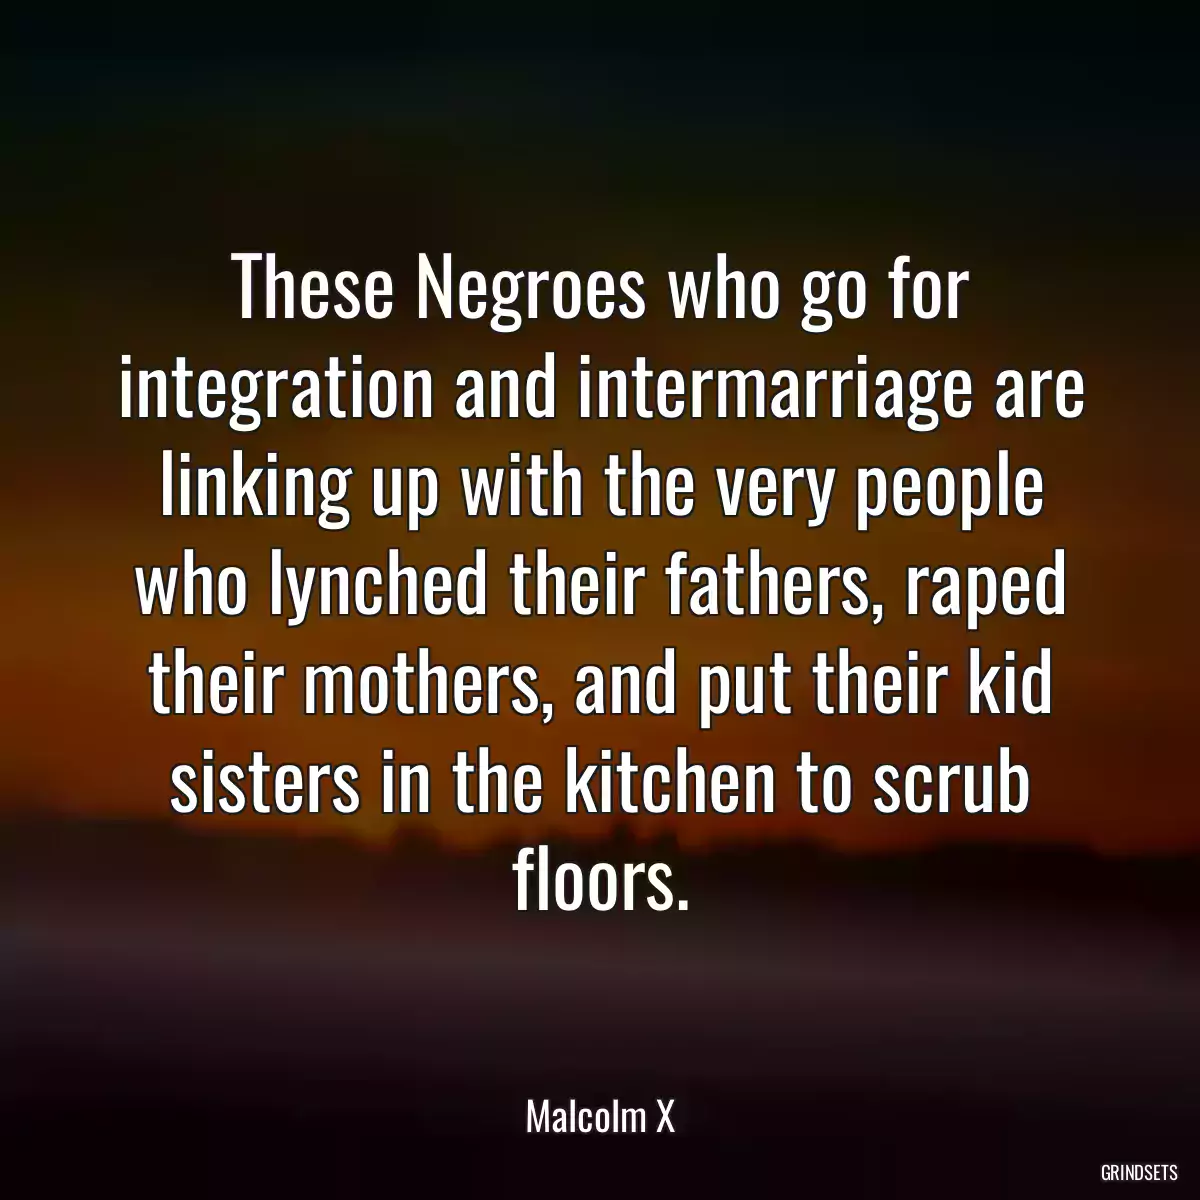 These Negroes who go for integration and intermarriage are linking up with the very people who lynched their fathers, raped their mothers, and put their kid sisters in the kitchen to scrub floors.